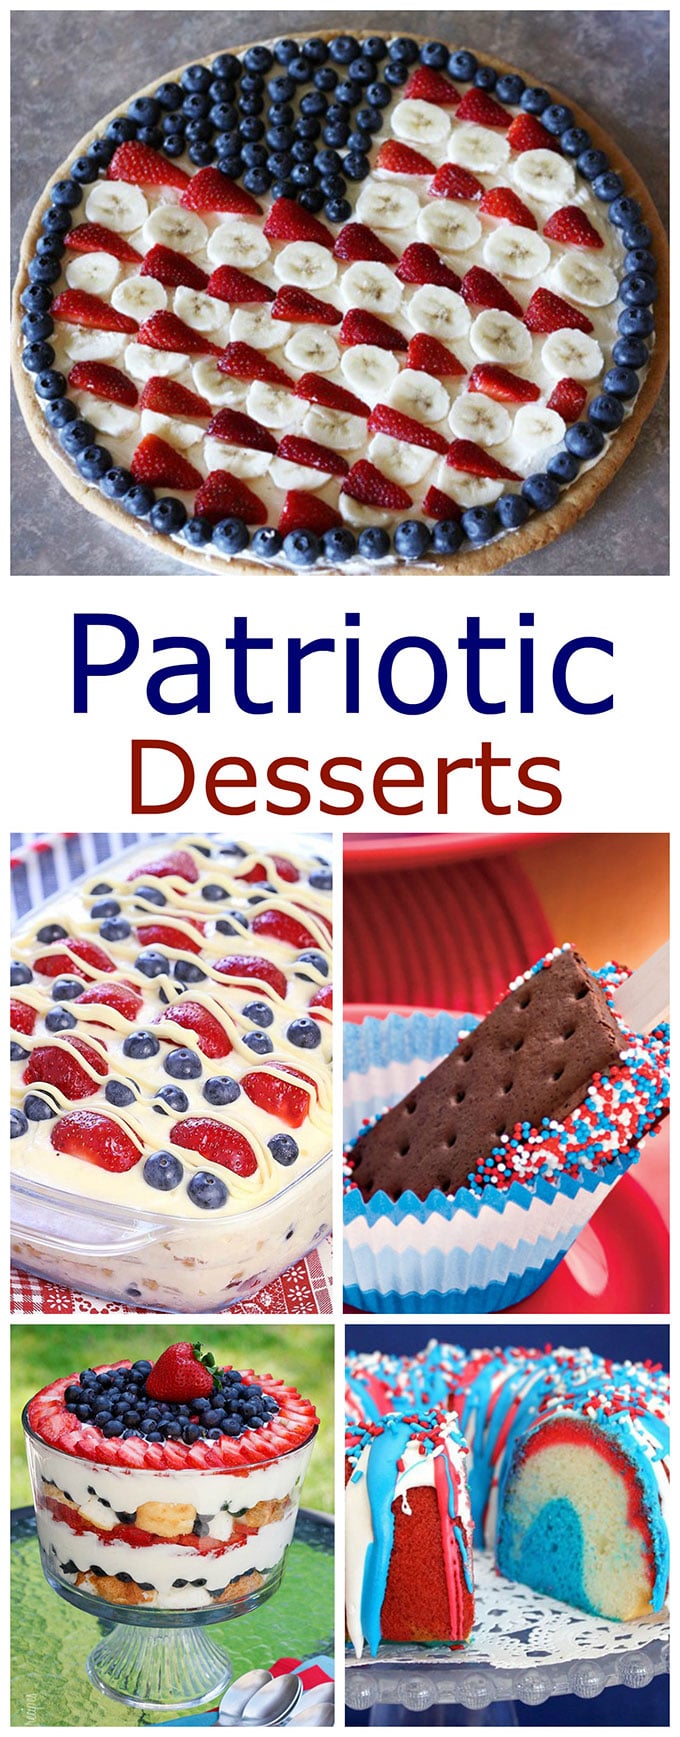 A collection of fun, festive and EASY patriotic desserts for your summer get togethers, picnics and parties!